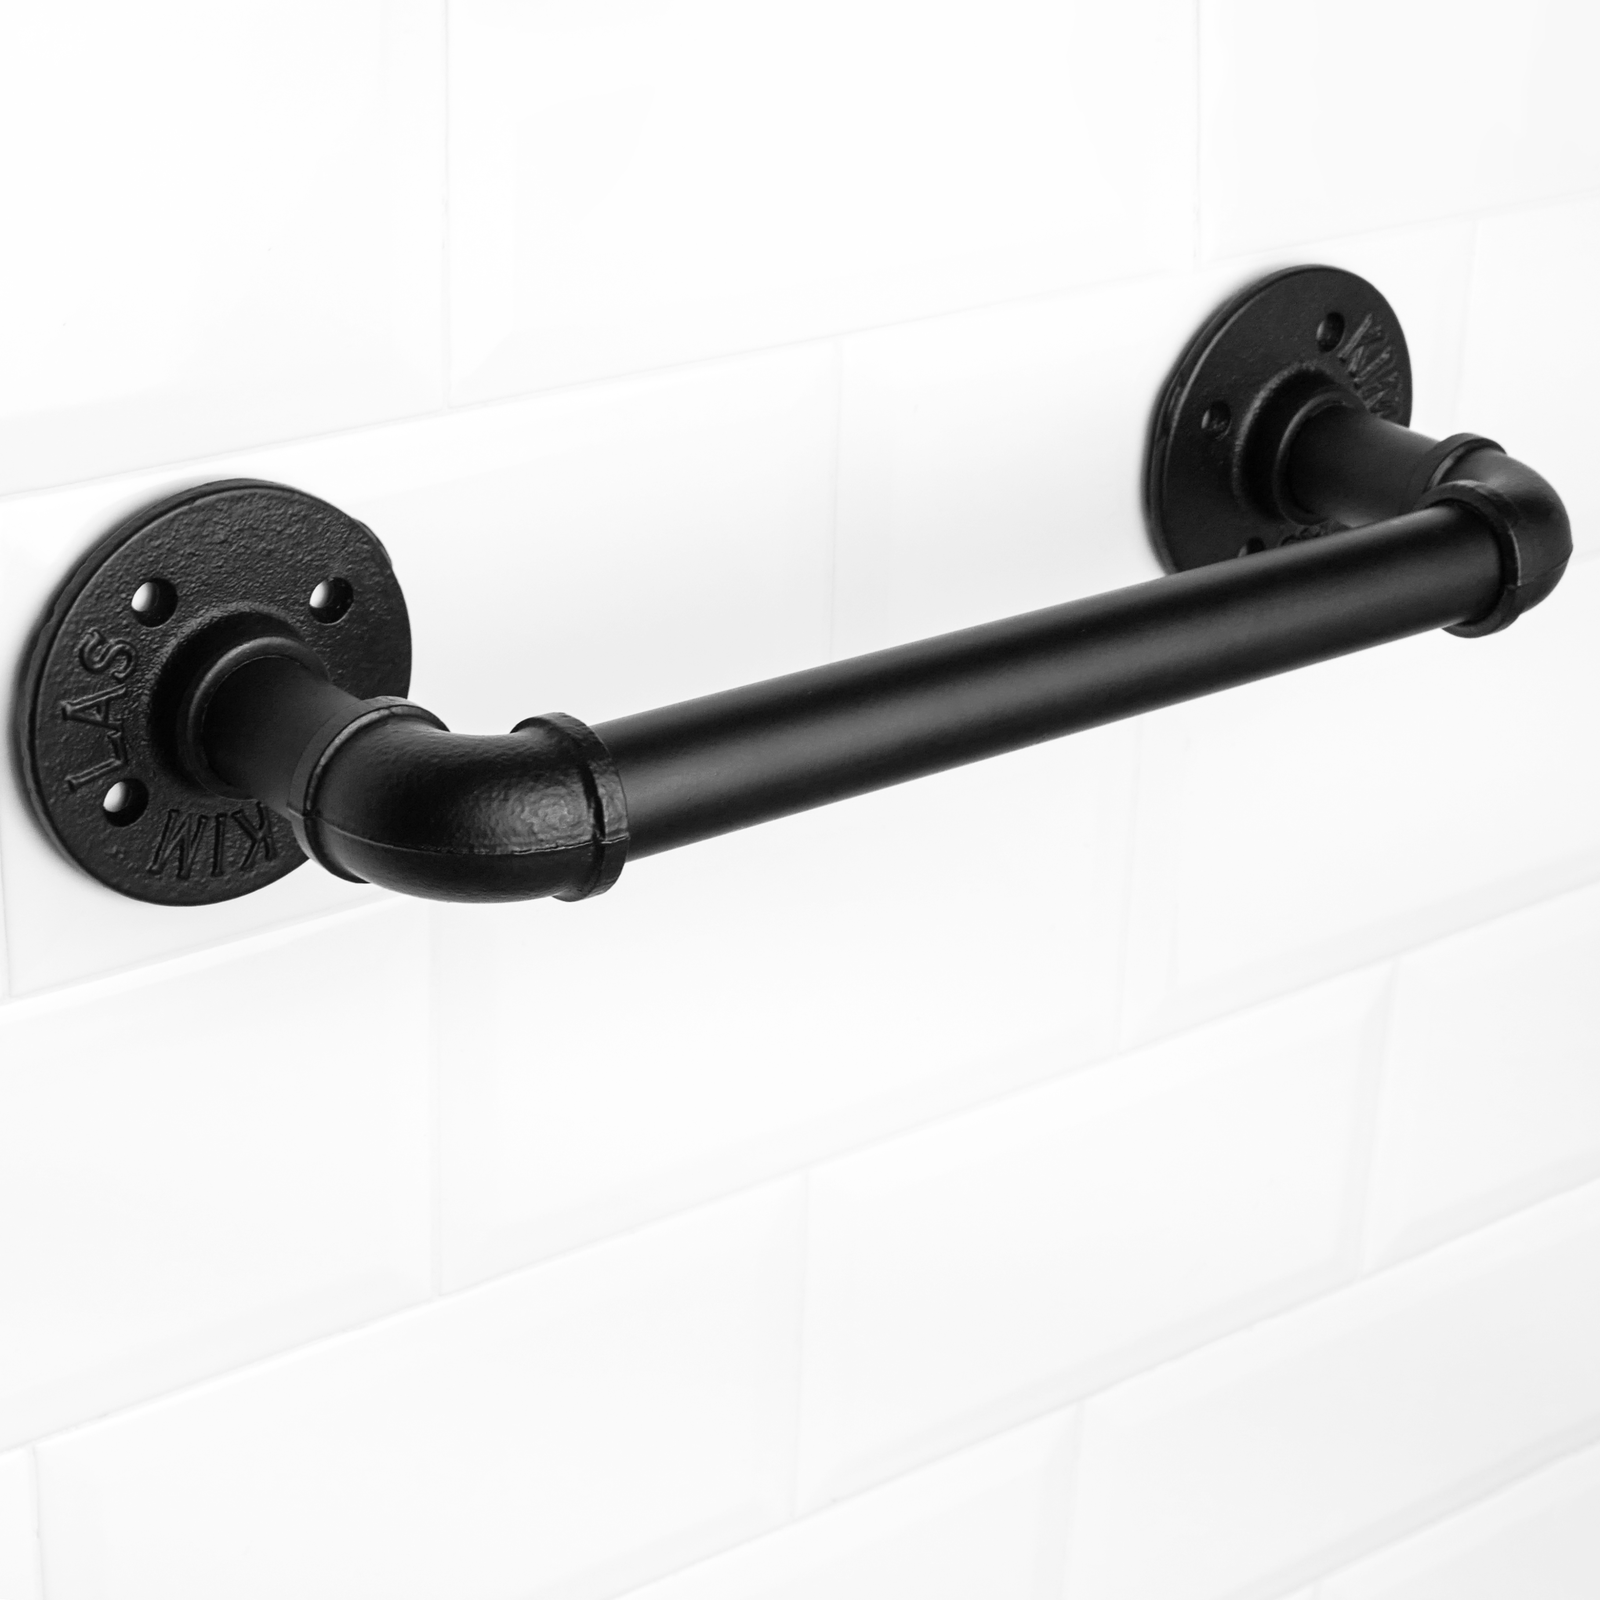 Support bar 300 mm. Industrial and vintage pipe towel rail - Cablematic